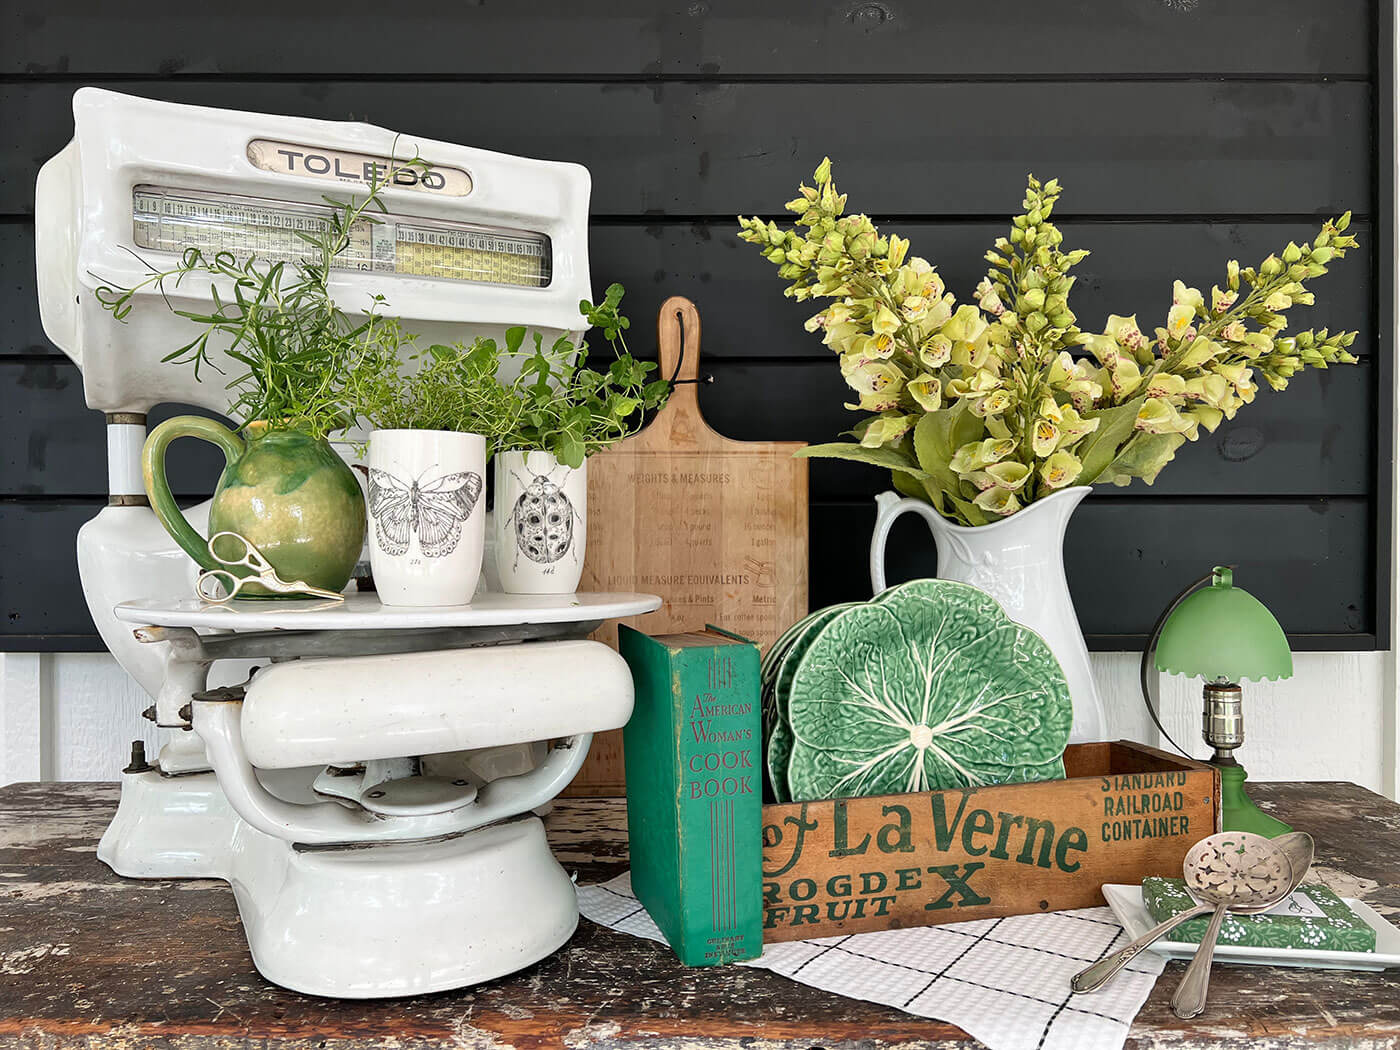 Decorating vignette with green vintage items with herb garden